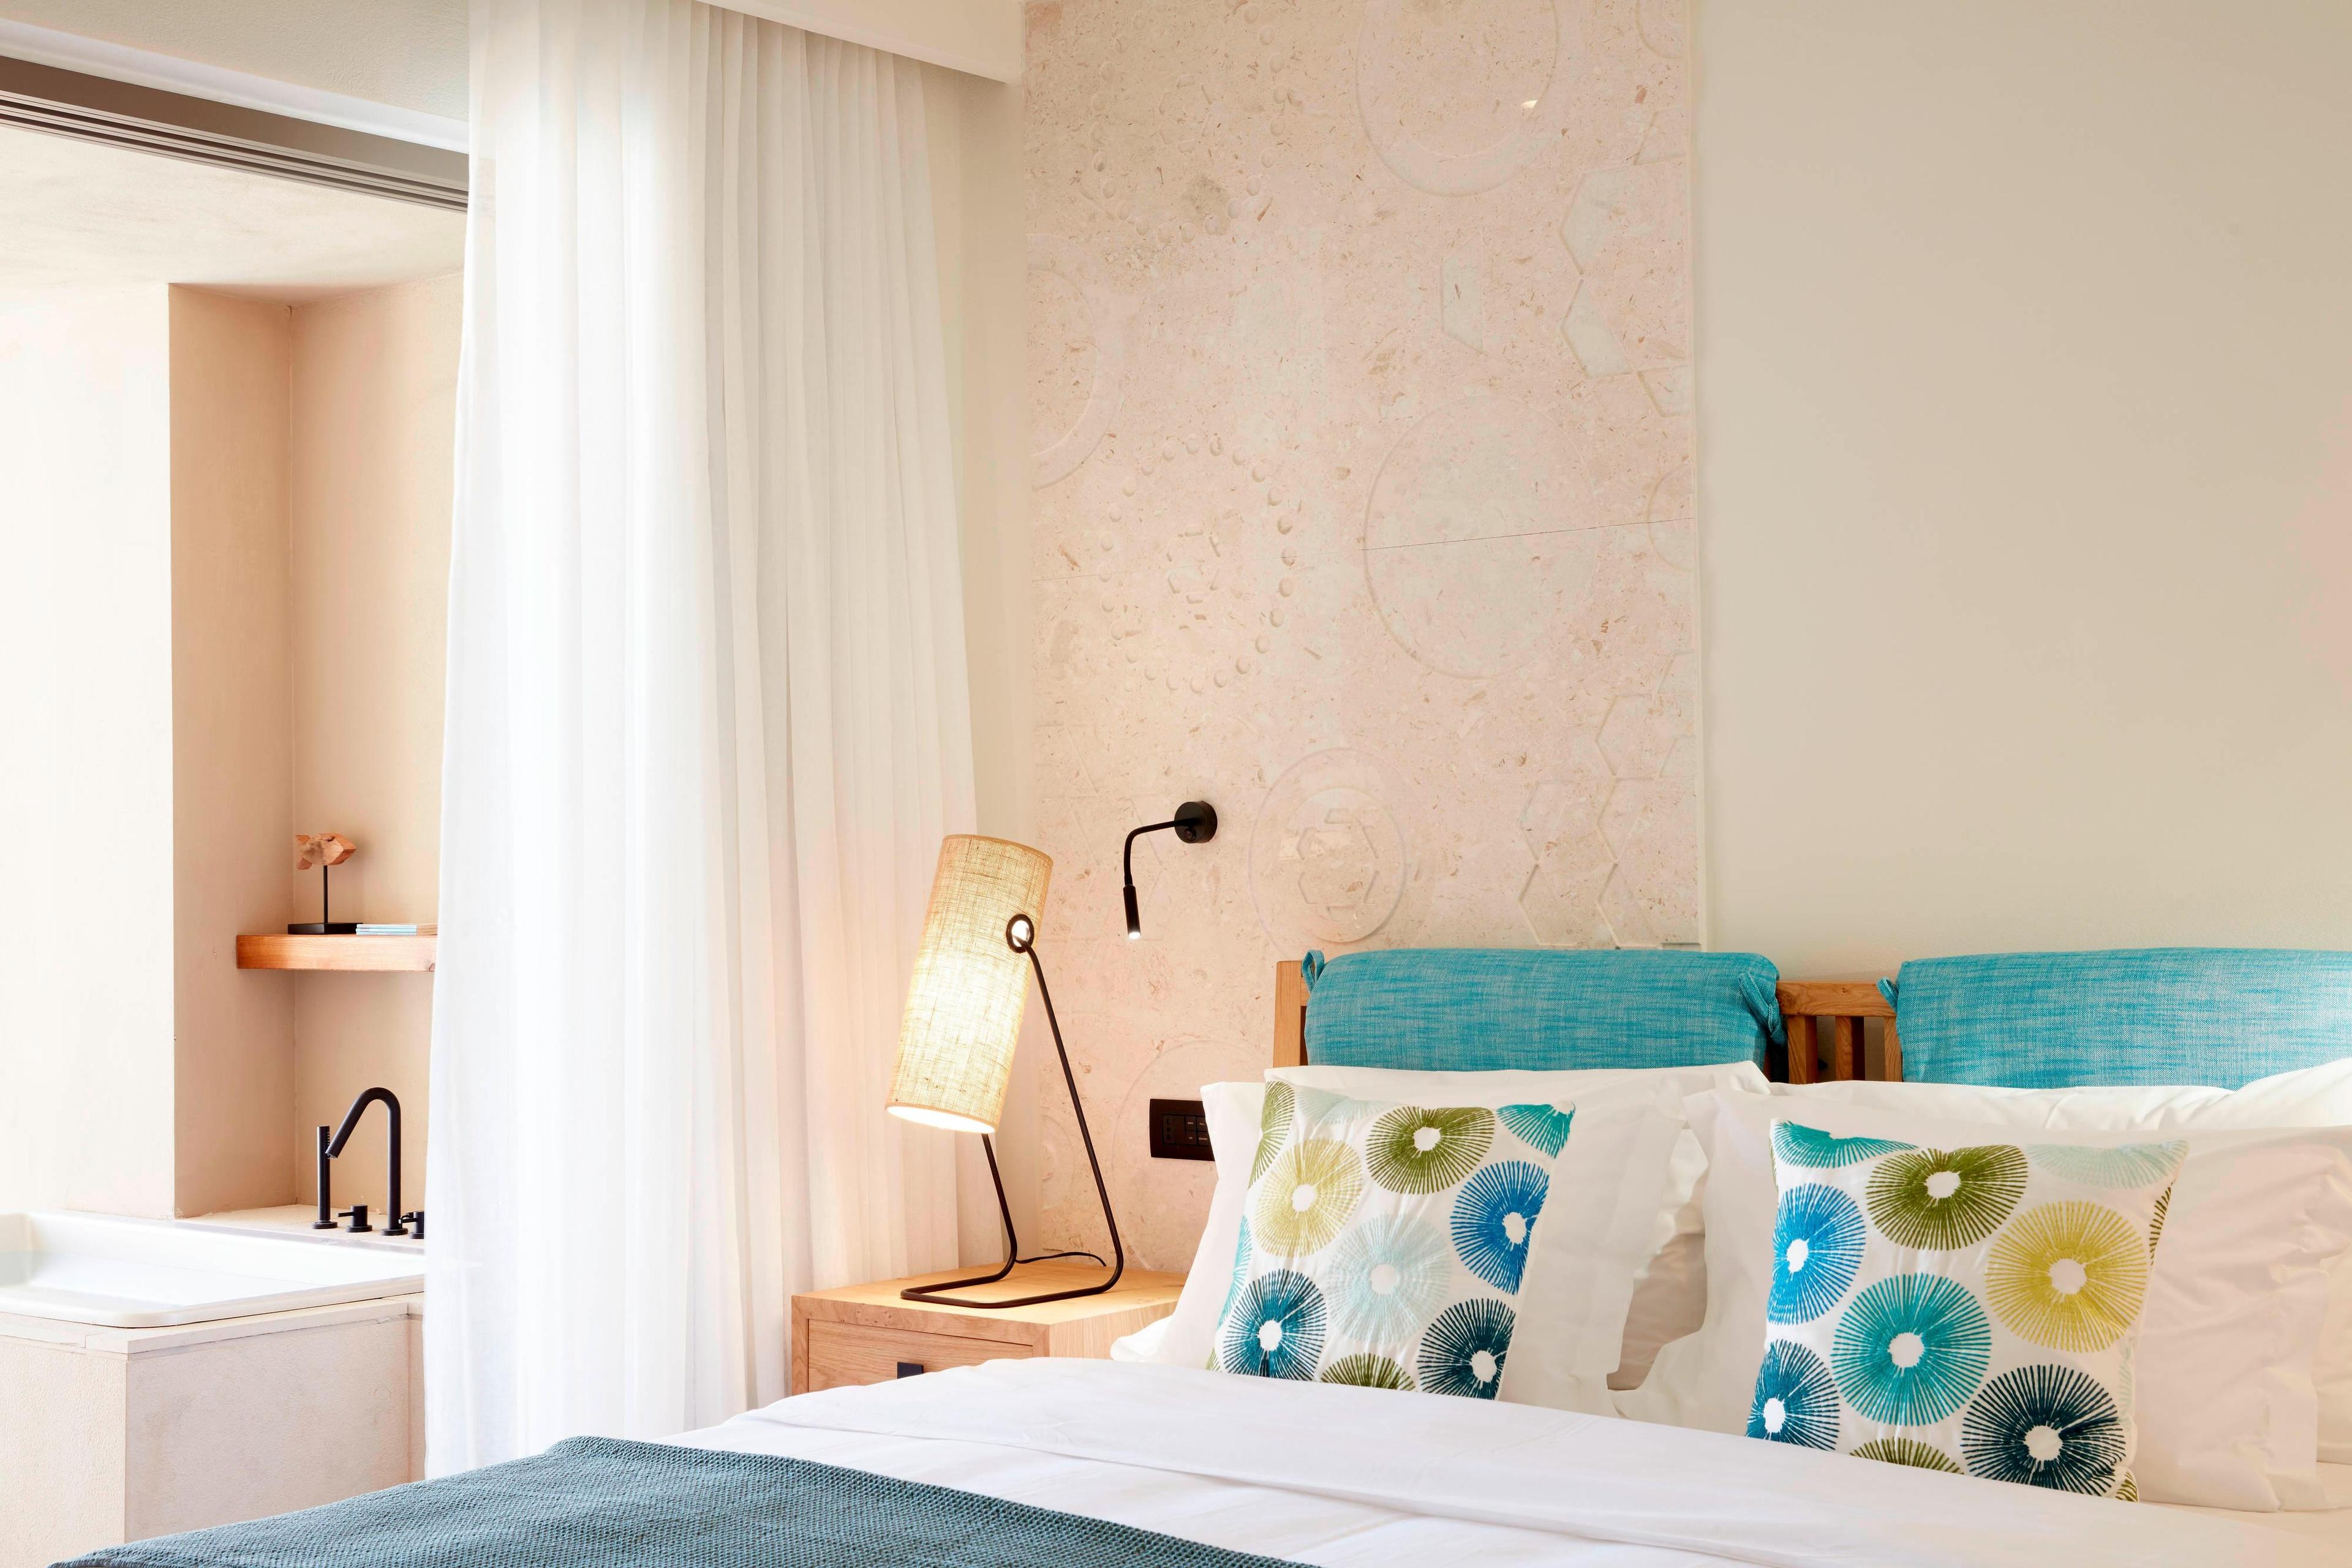 The guest rooms design offers a contemporary approach Inspired by Crete's traditional colors and patterns.